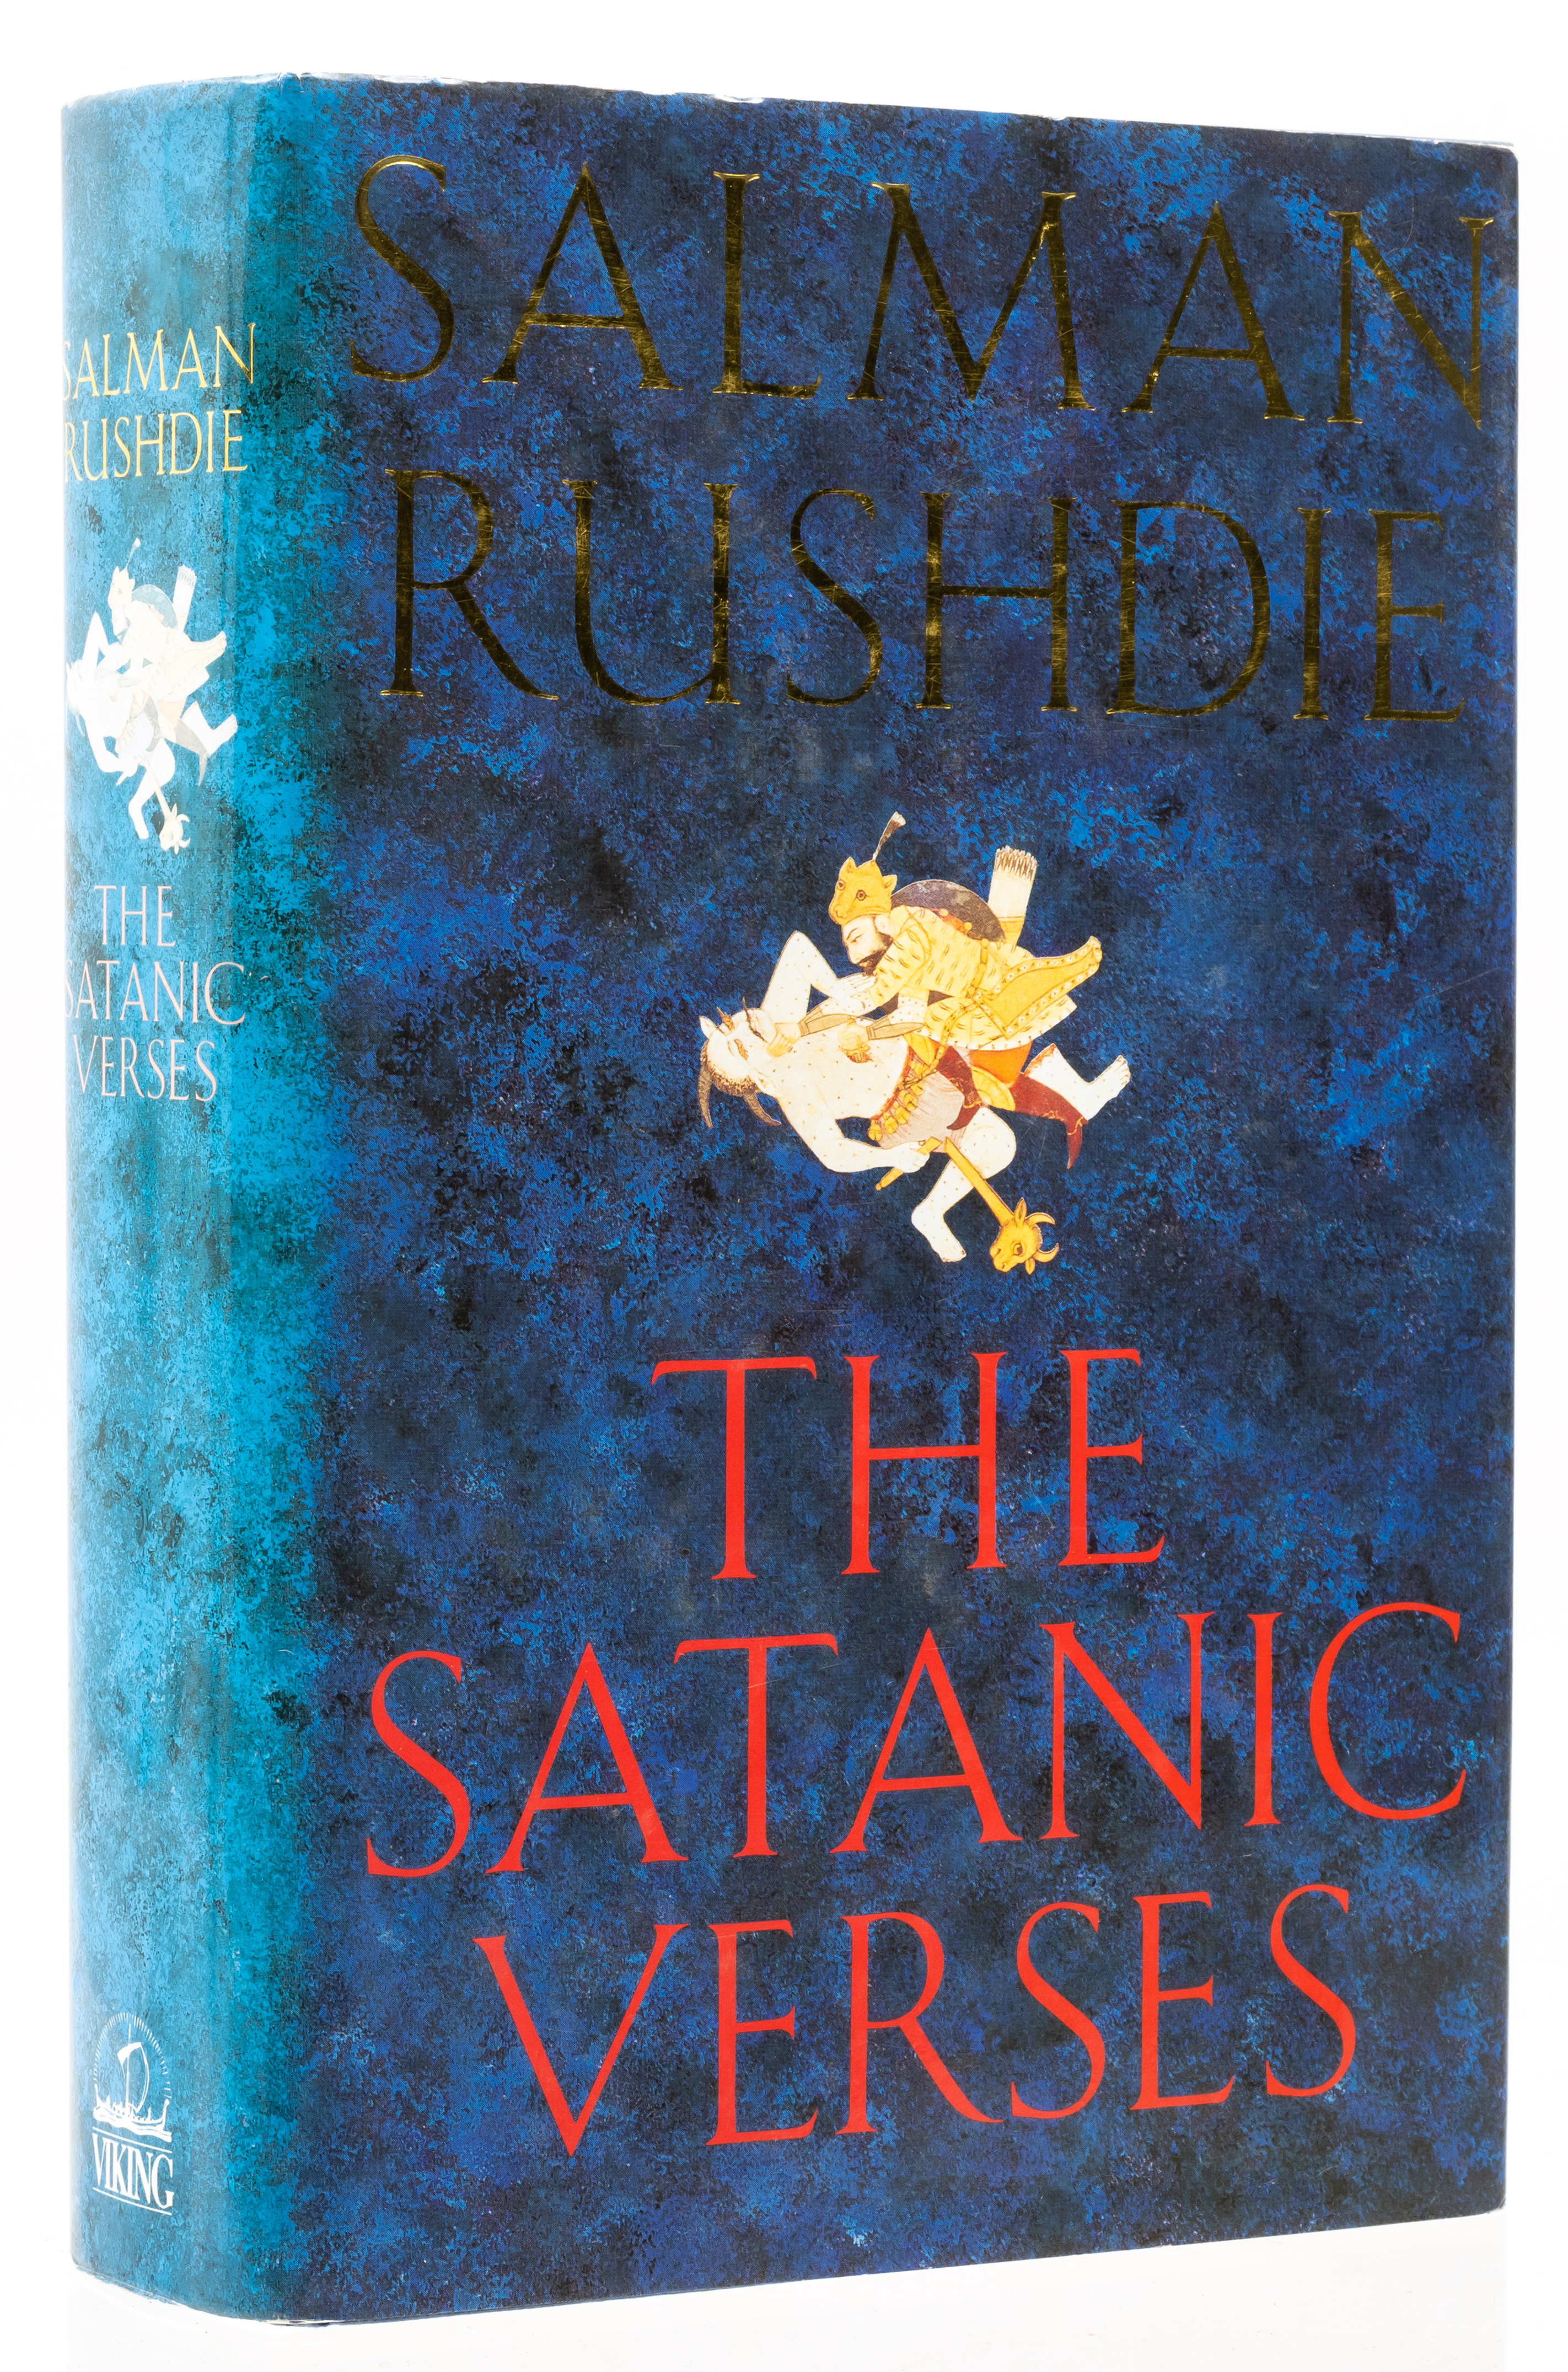 Rushdie (Salman) The Satanic Verses, signed presentation inscription from the author, intriguing ...